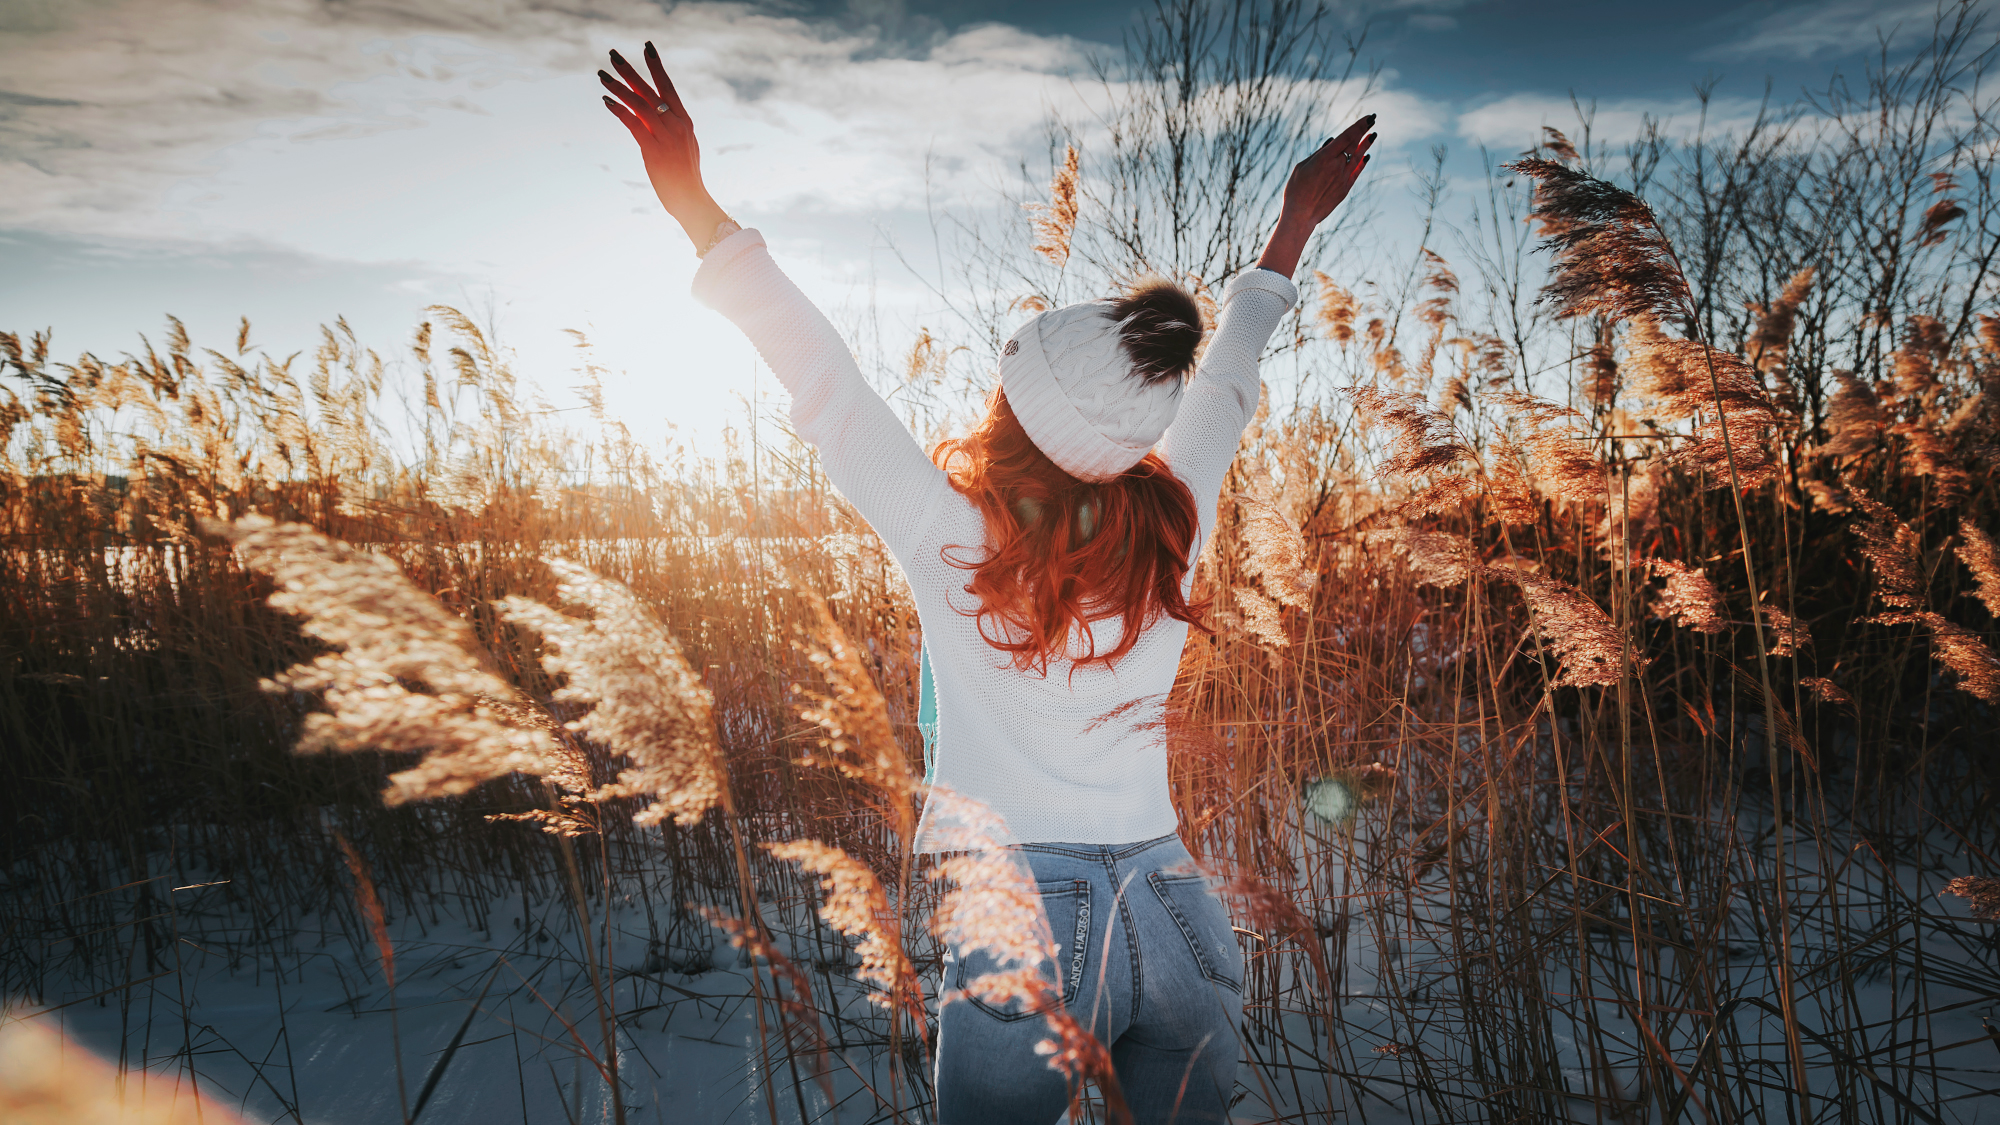 People 2000x1125 women model redhead portrait back woolly hat sweater jeans arms up outdoors winter snow sky sunset clouds women outdoors Anton Harisov